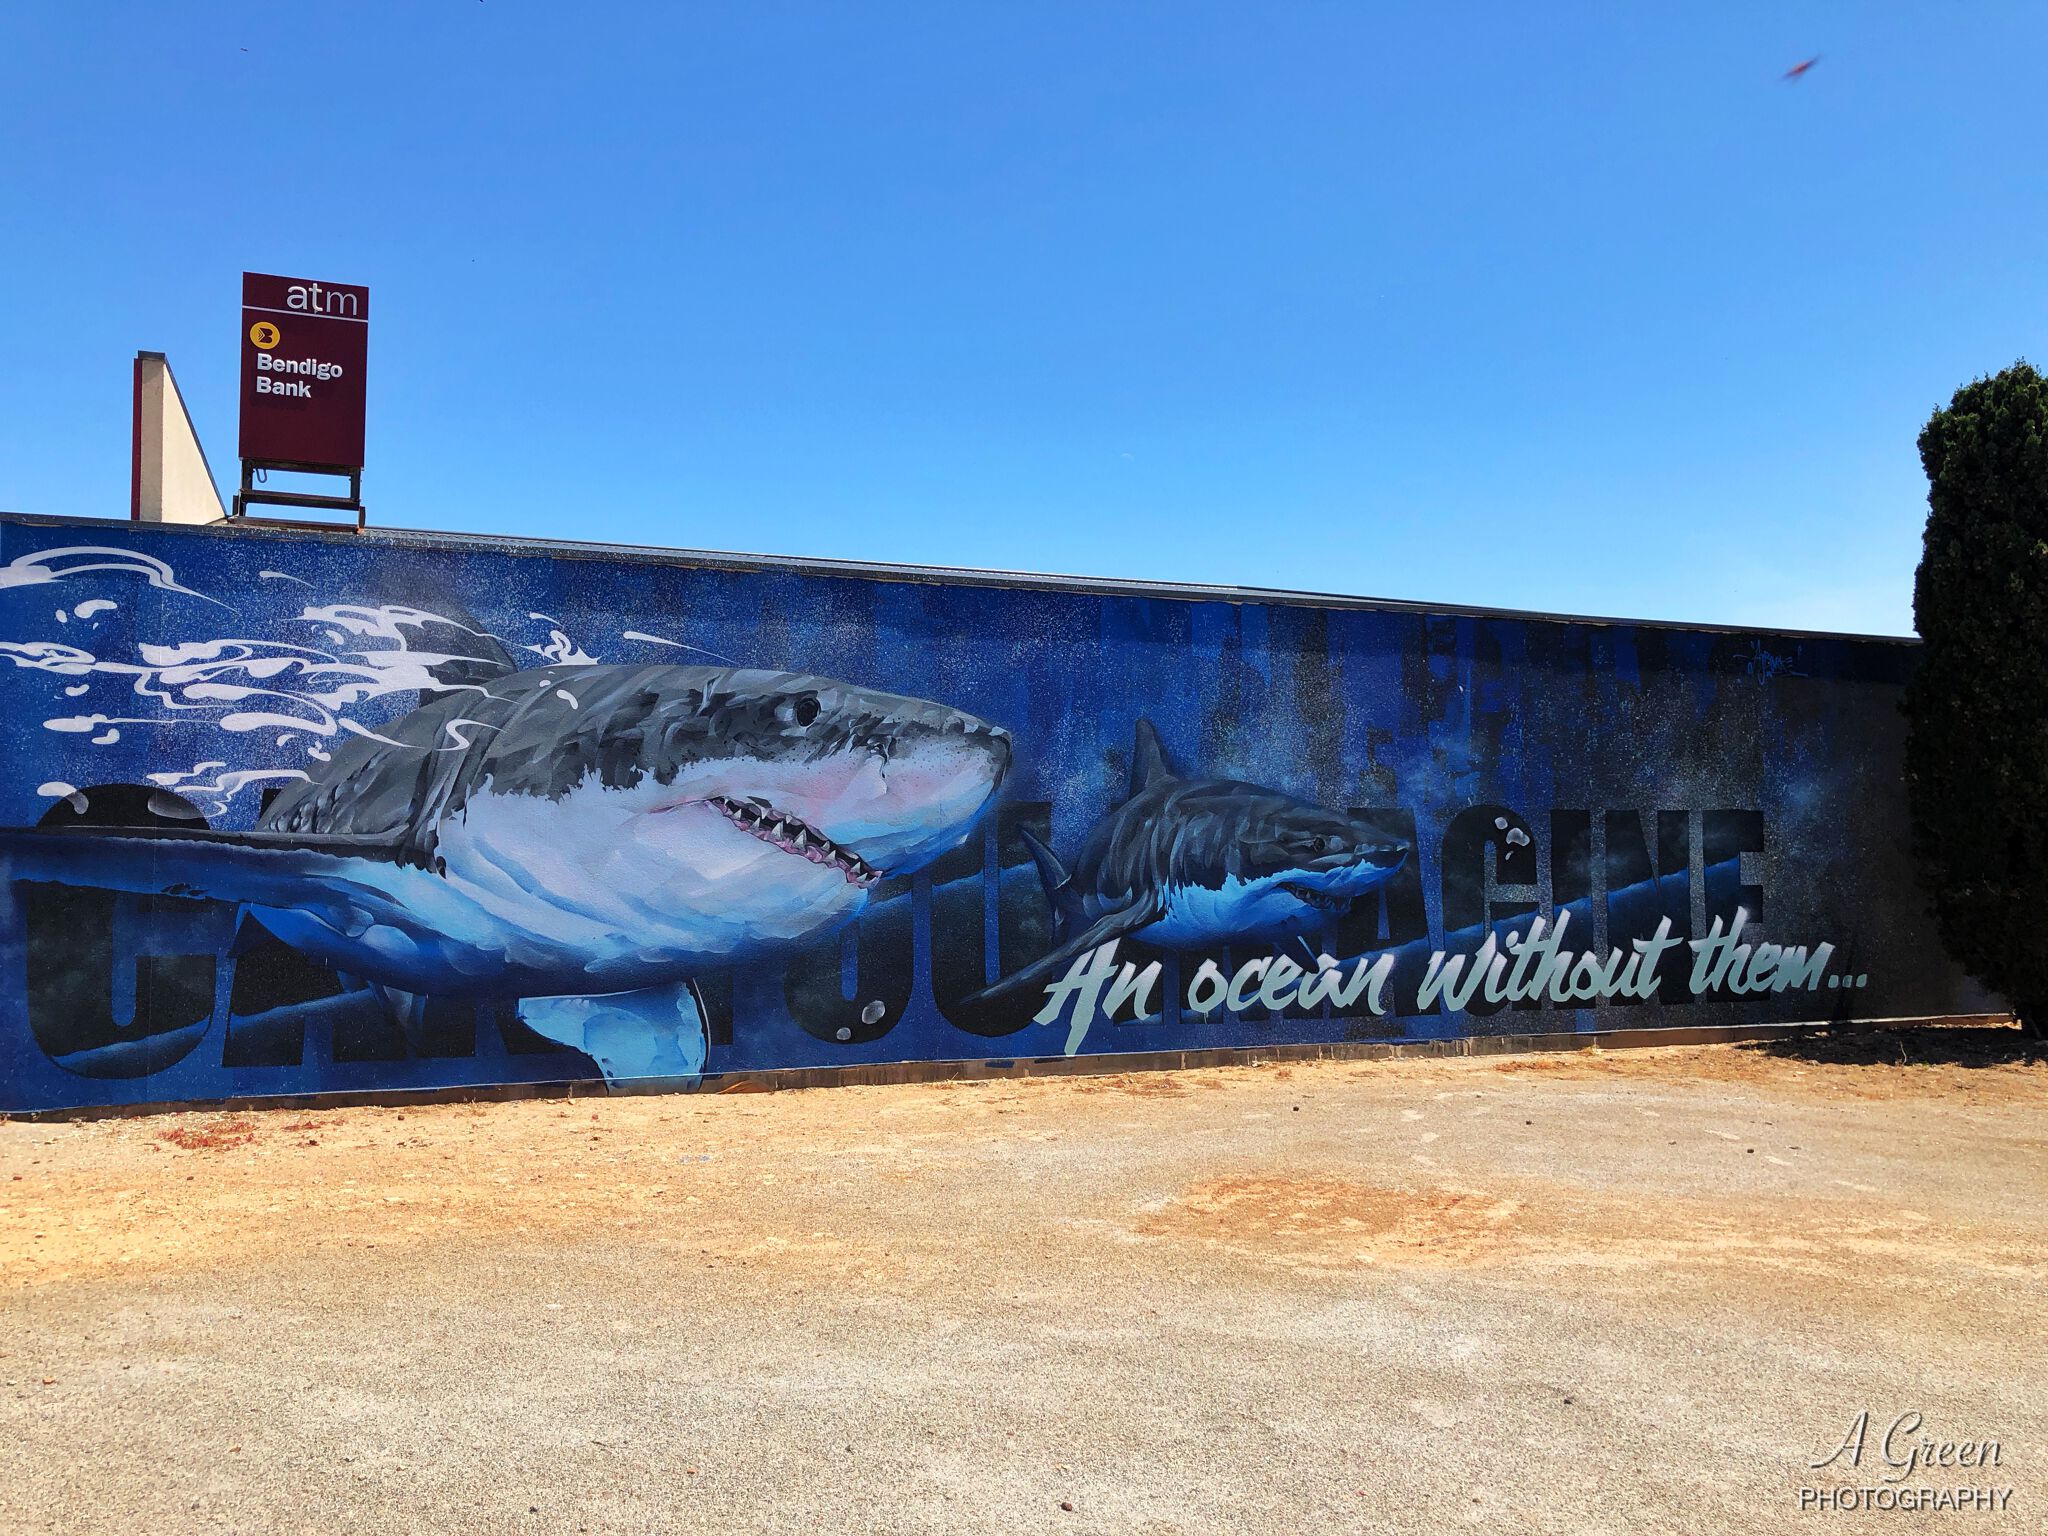 Andrew J Bourke&mdash;Sharks, an ocean without them